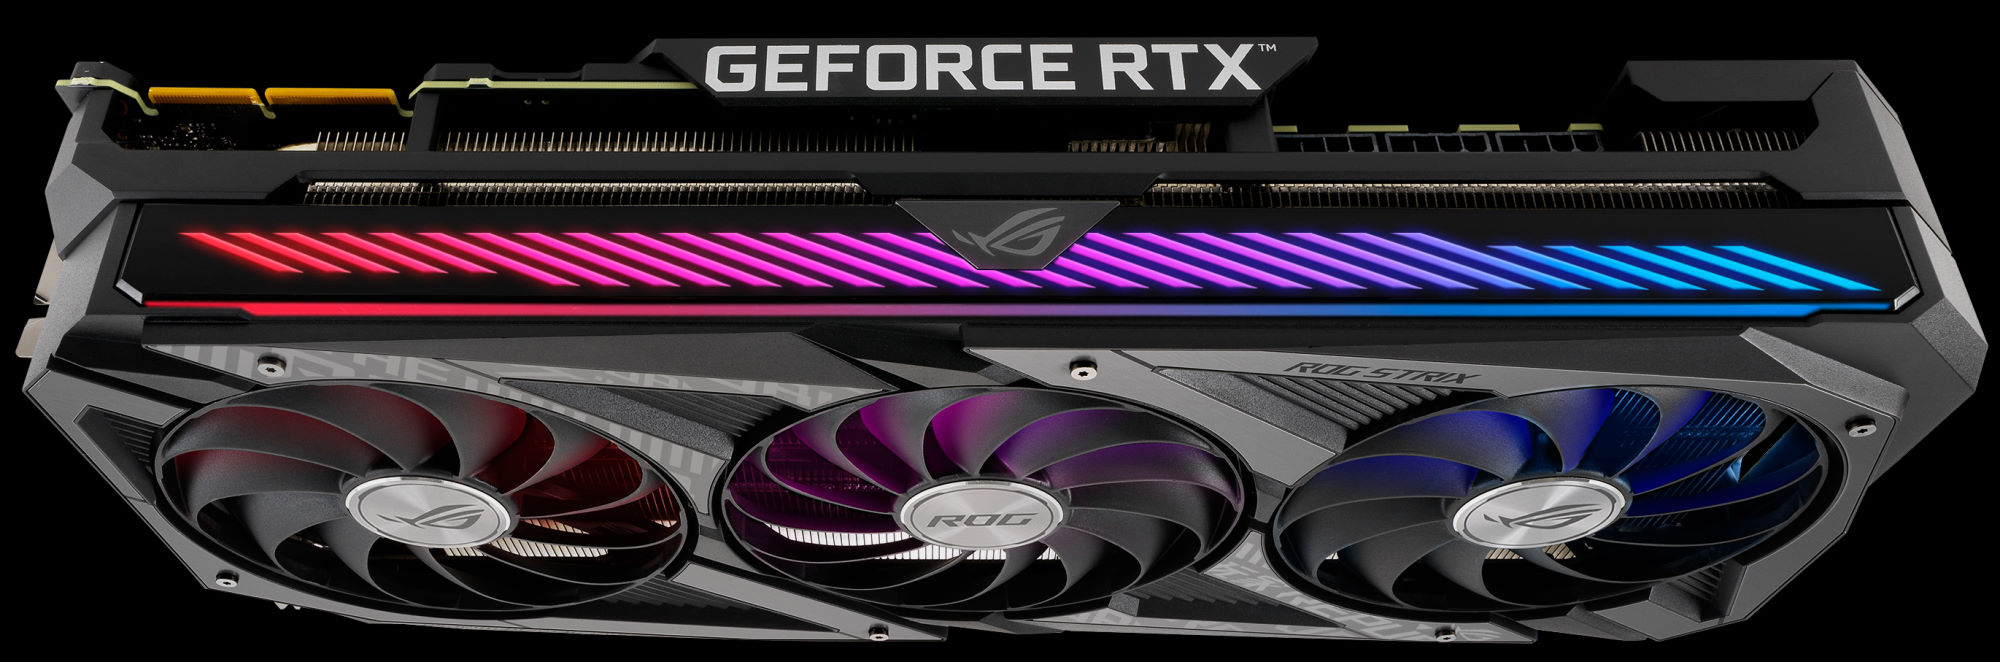 1598955965775 - Asus Nvidia Geforce RTX 3090 & 3080 Press Release